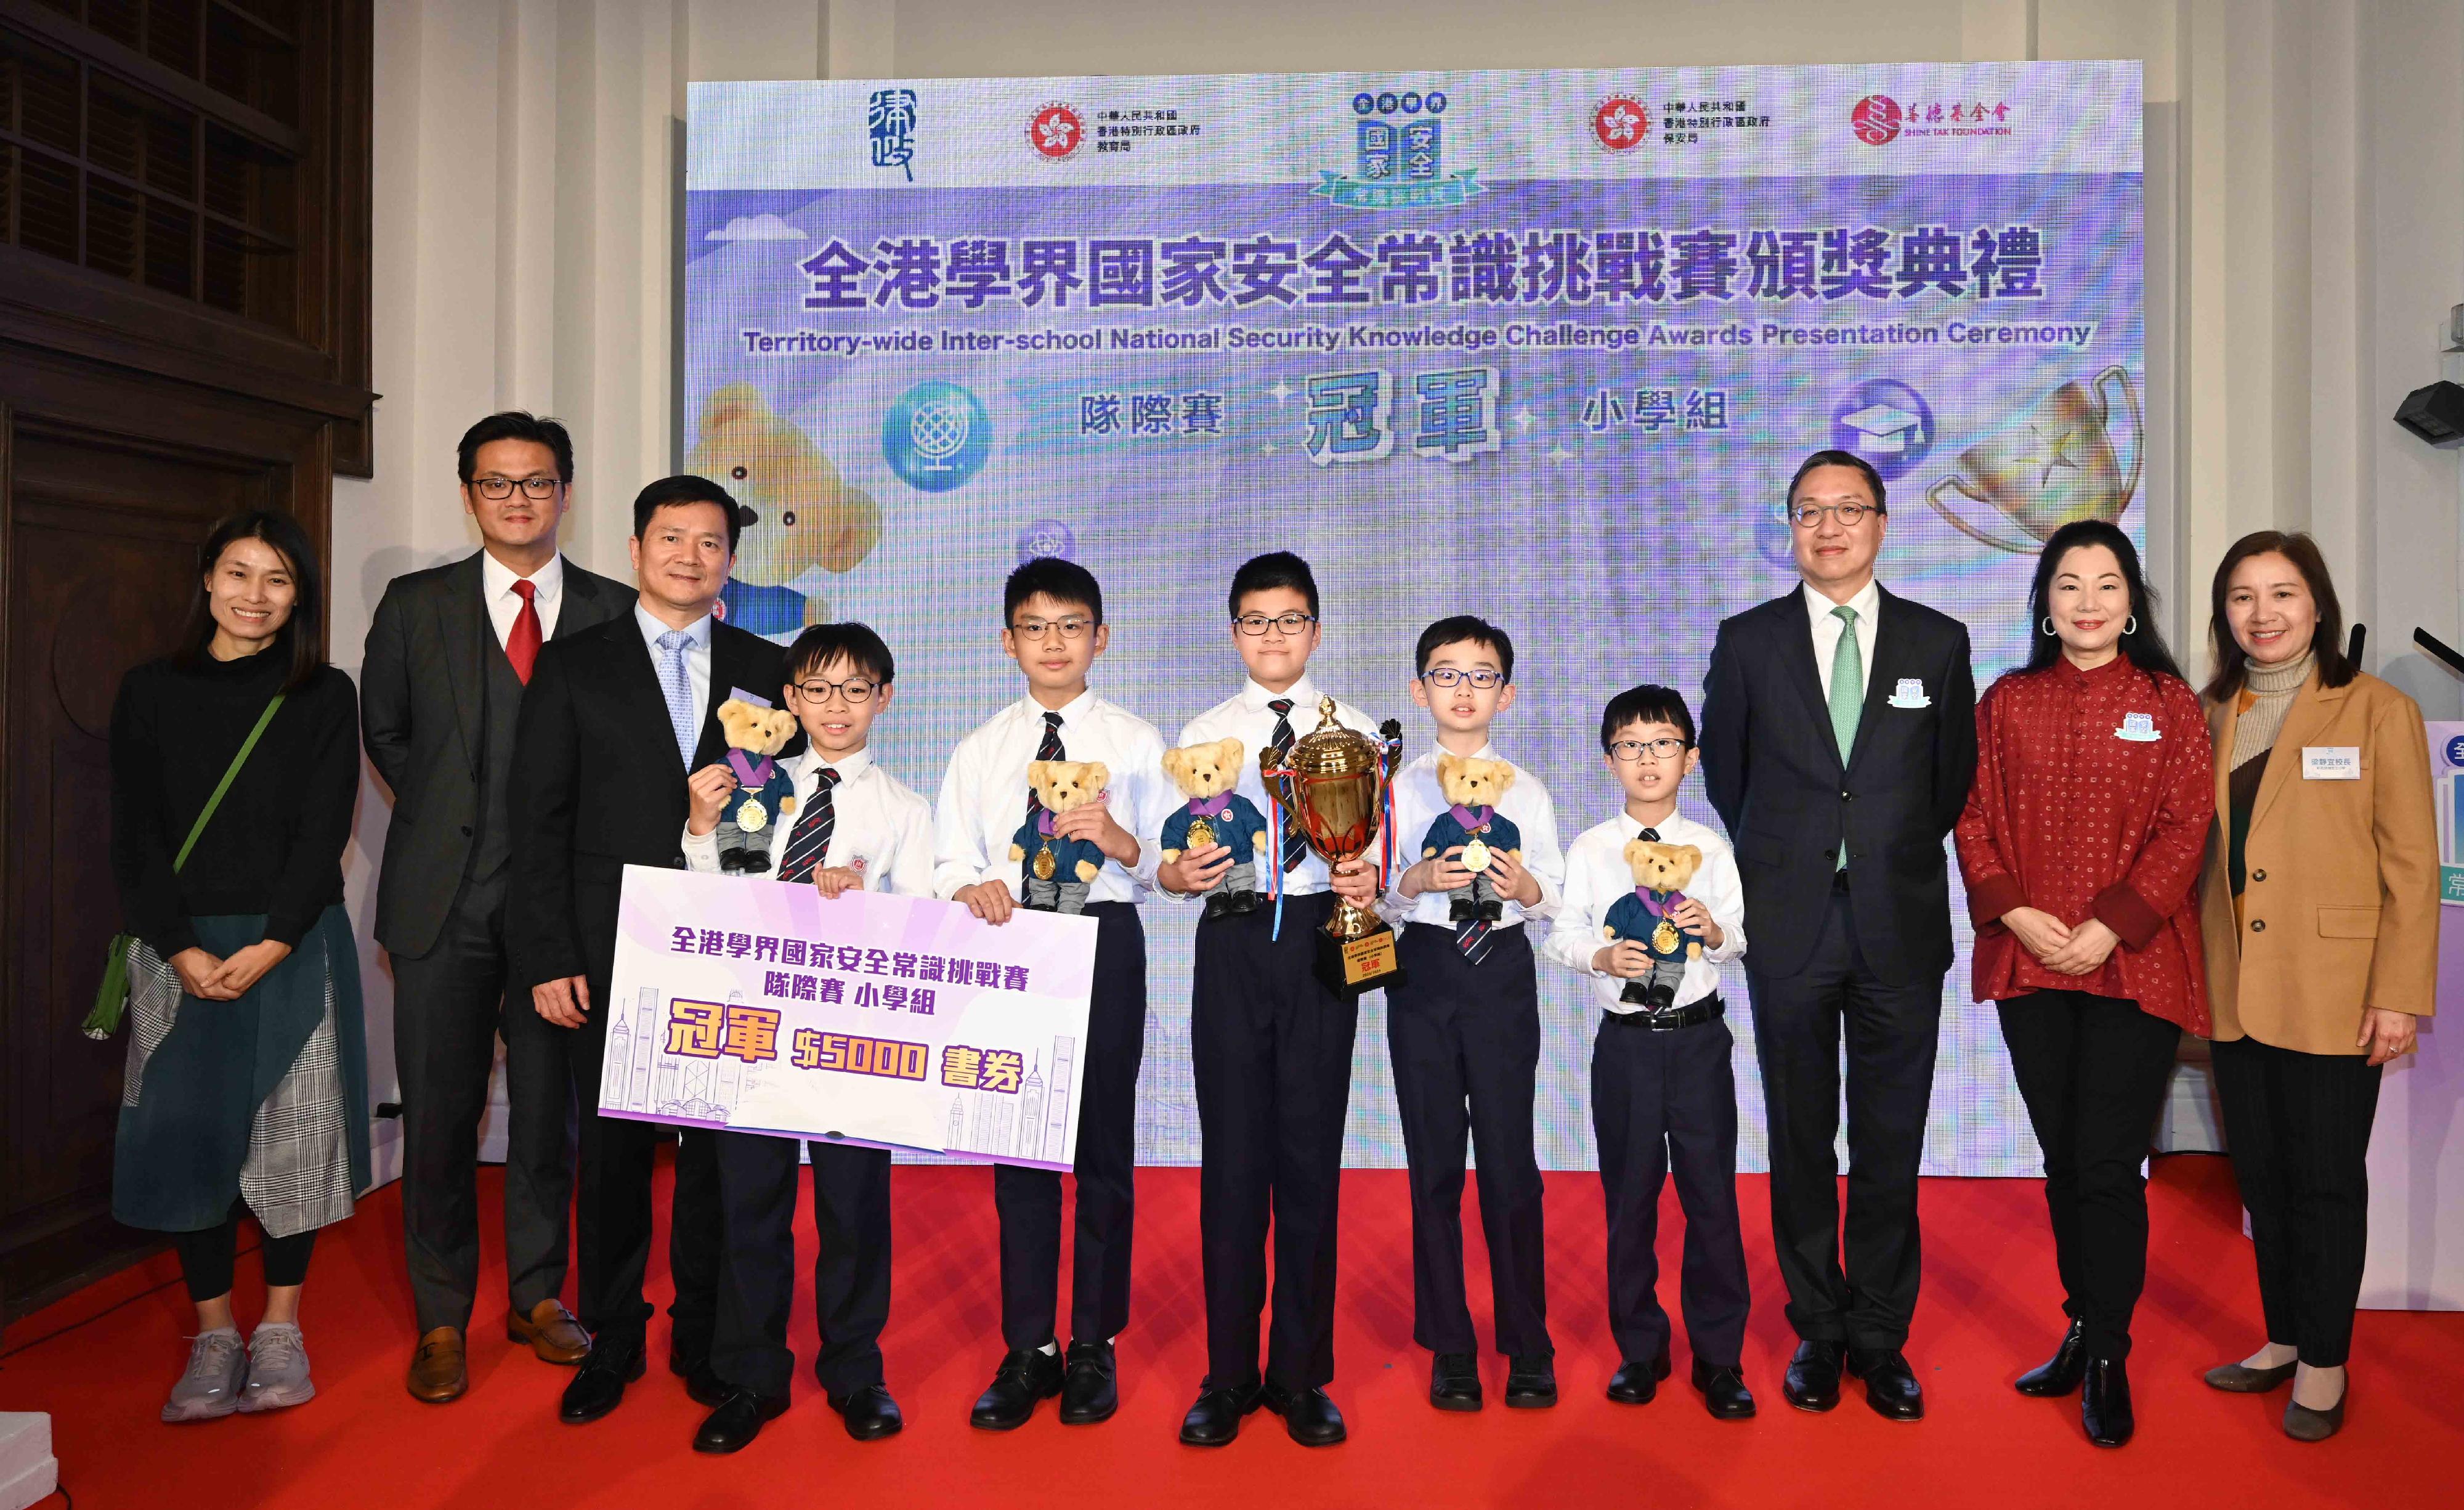 The Territory-wide Inter-school National Security Knowledge Challenge, jointly organised by the Department of Justice, the Security Bureau, the Education Bureau and the Hong Kong Shine Tak Foundation, held its finals this morning (February 26), and a prize presentation ceremony at the former French Mission Building in the afternoon. Photo shows the Secretary for Justice, Mr Paul Lam, SC (third right); the Director General of the Police Liaison Department of the Liaison Office of the Central People's Government in the Hong Kong Special Administrative Region, Mr Chen Feng (third left); the Chairman of the Hong Kong Shine Tak Foundation, Mrs Tung Ng Ling-ling (second right); and other guests presenting the Champion award of primary school team competition to the participants from the Hennessy Road Government Primary School.